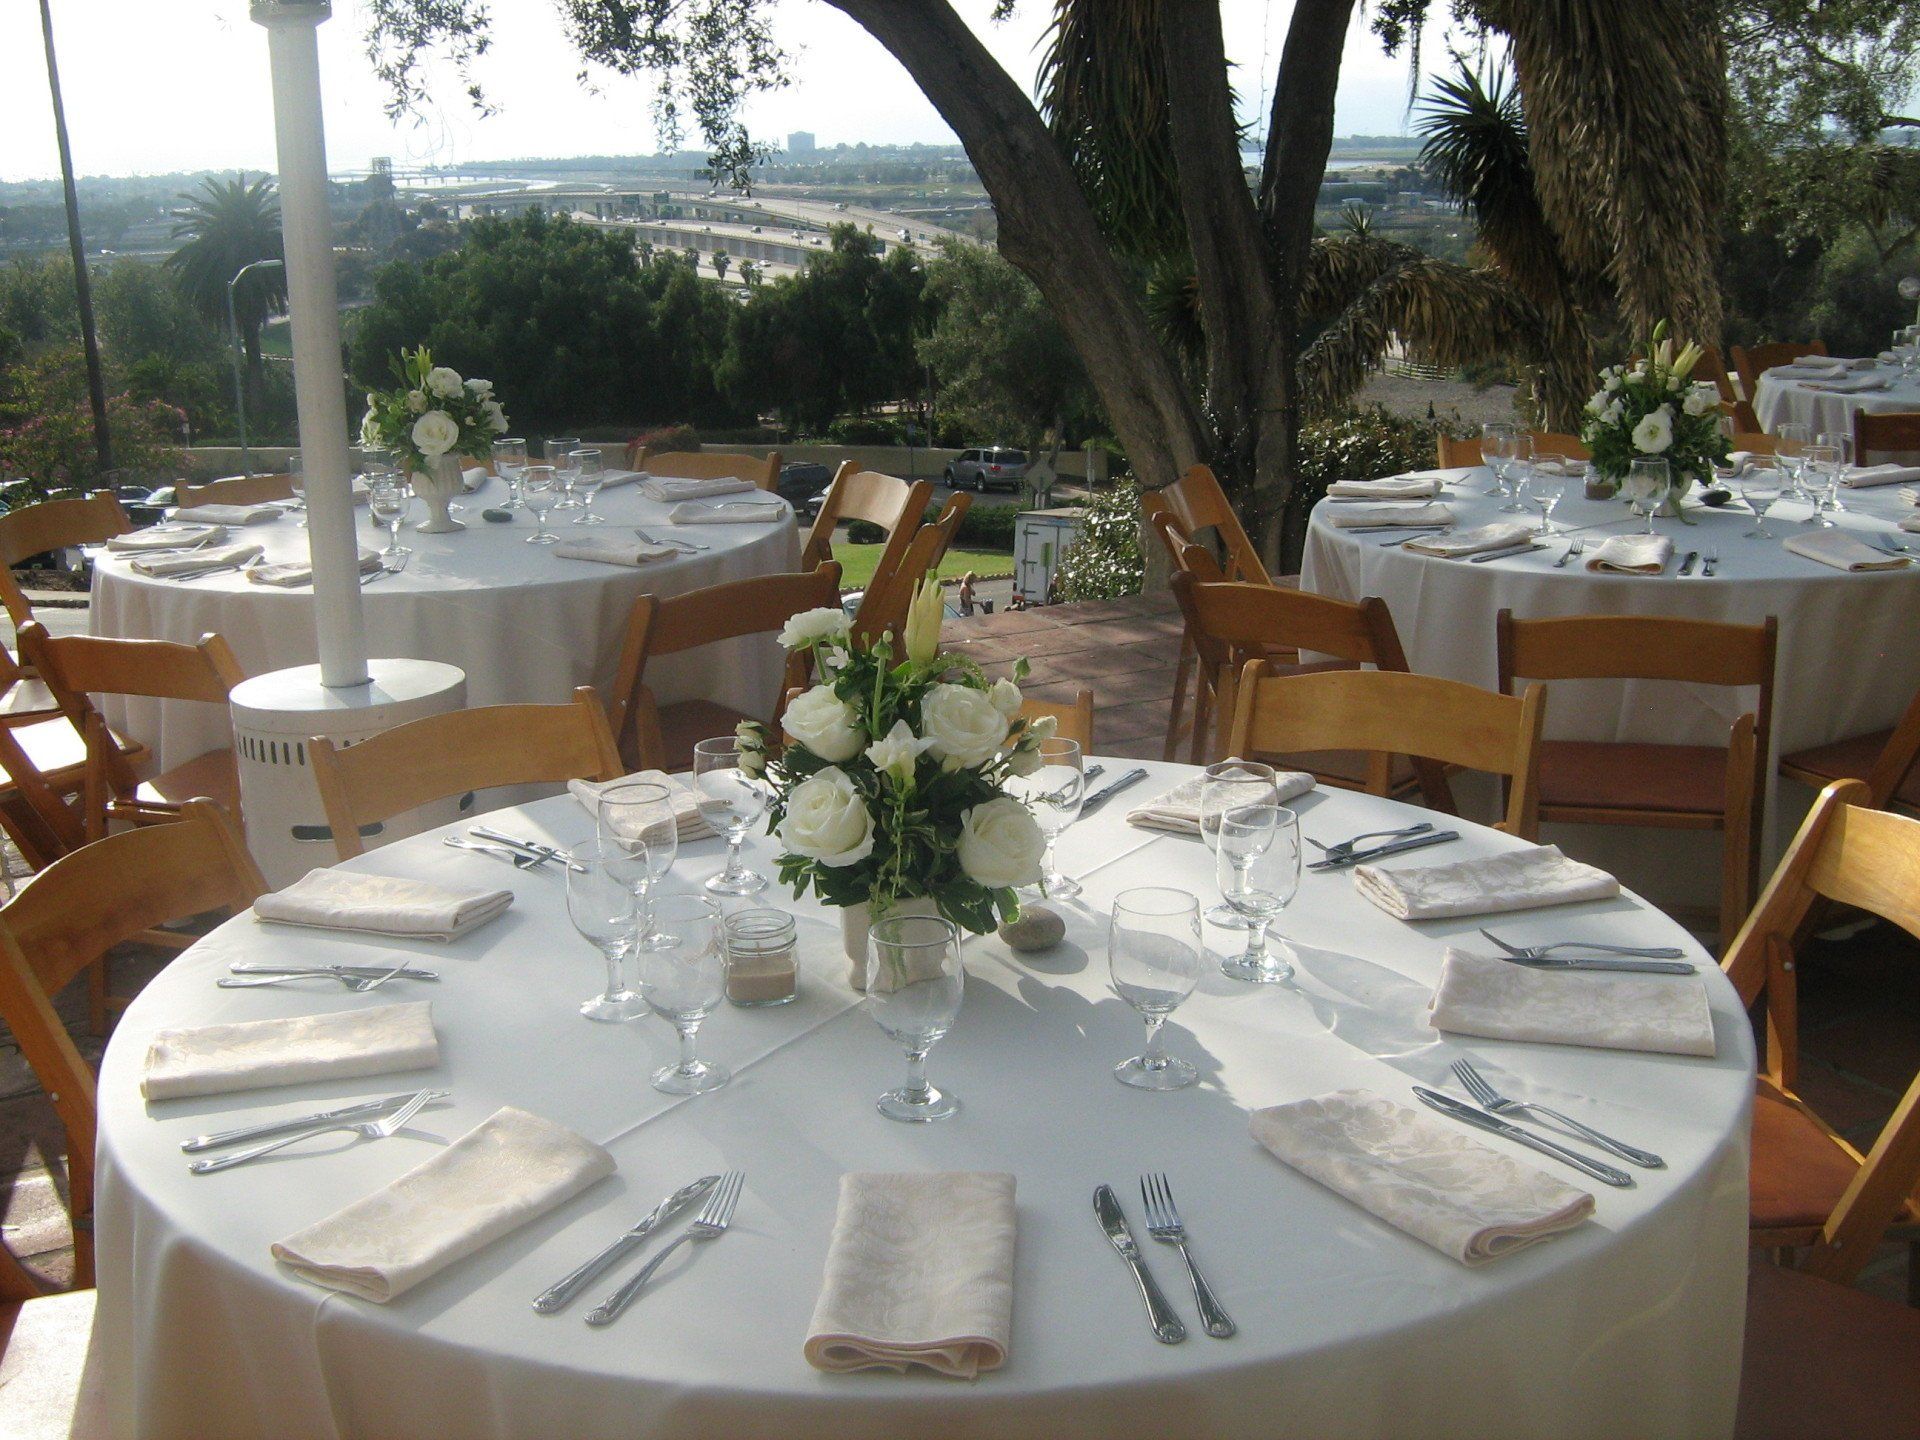 An event catering service set up in San Diego, CA